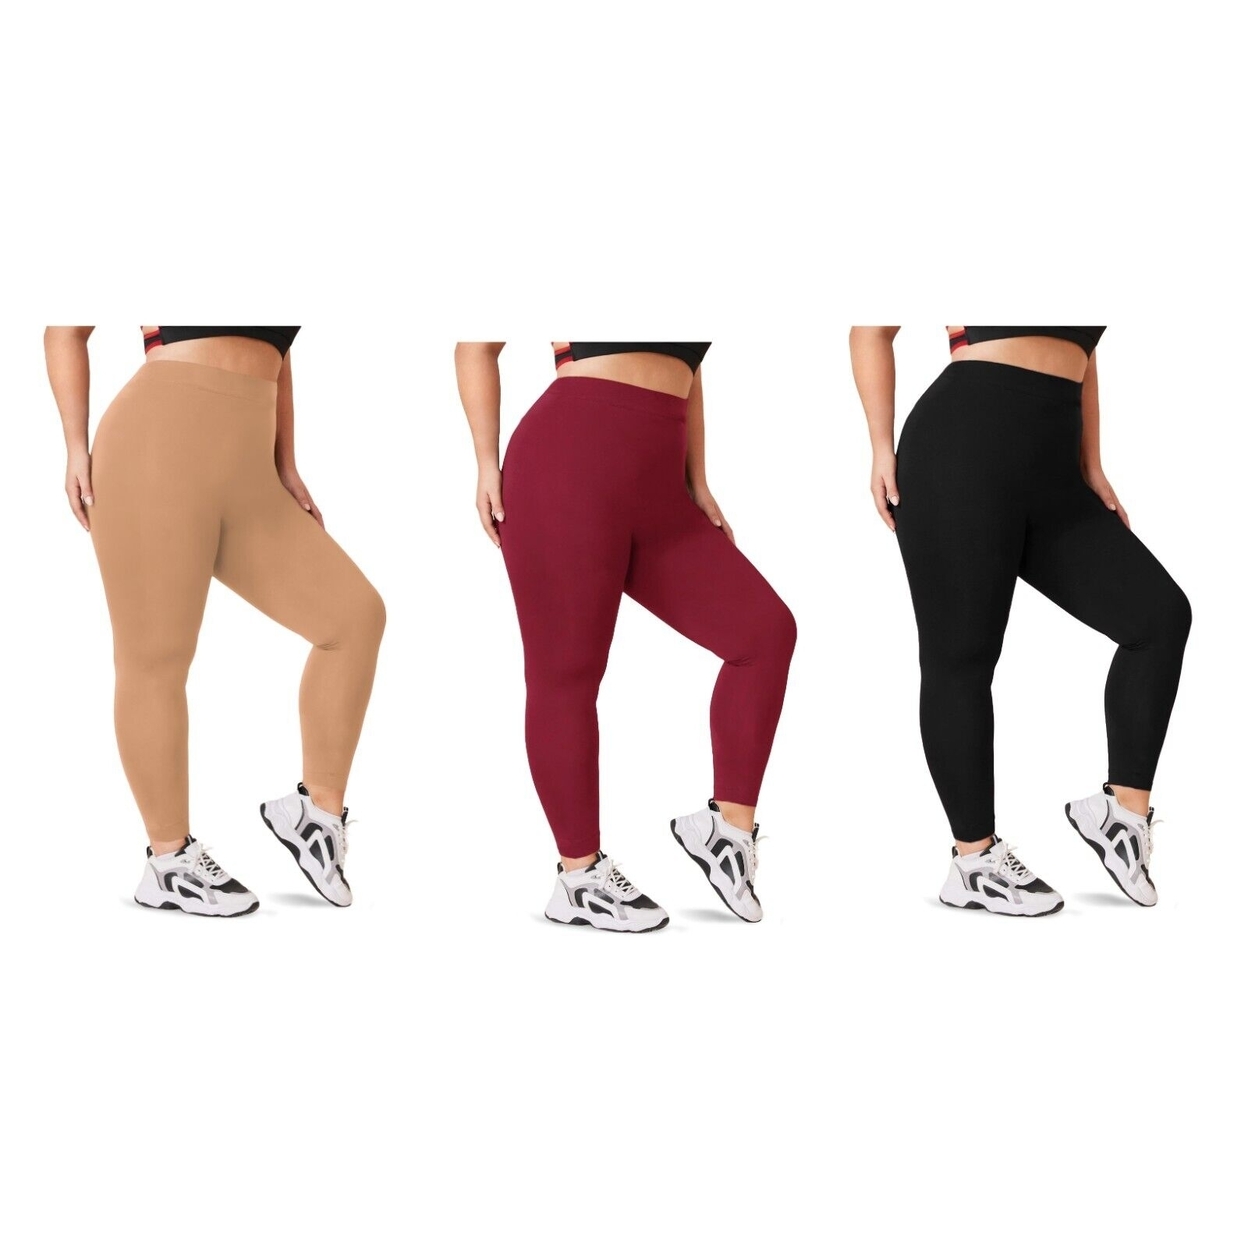 Multi-Pack: Women's Casual Ultra-Soft Smooth High Waisted Athletic Active Yoga Leggings Plus Size Available - 1-pack, 1x